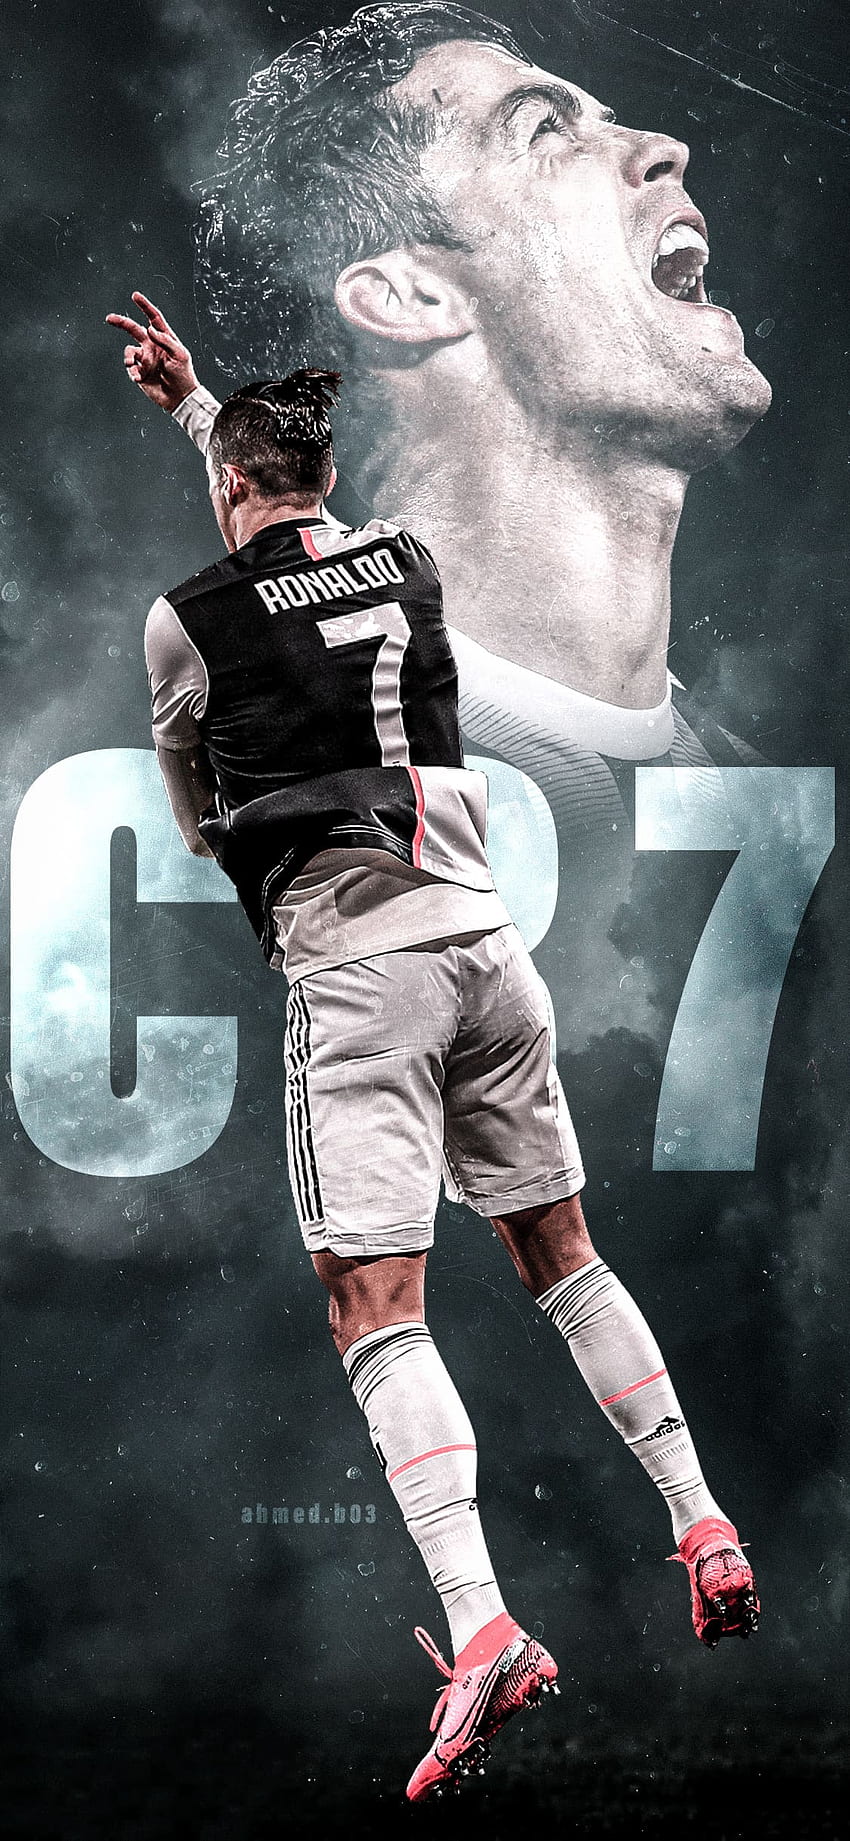 Cr7 Wallpaper Projects | Photos, videos, logos, illustrations and branding  on Behance